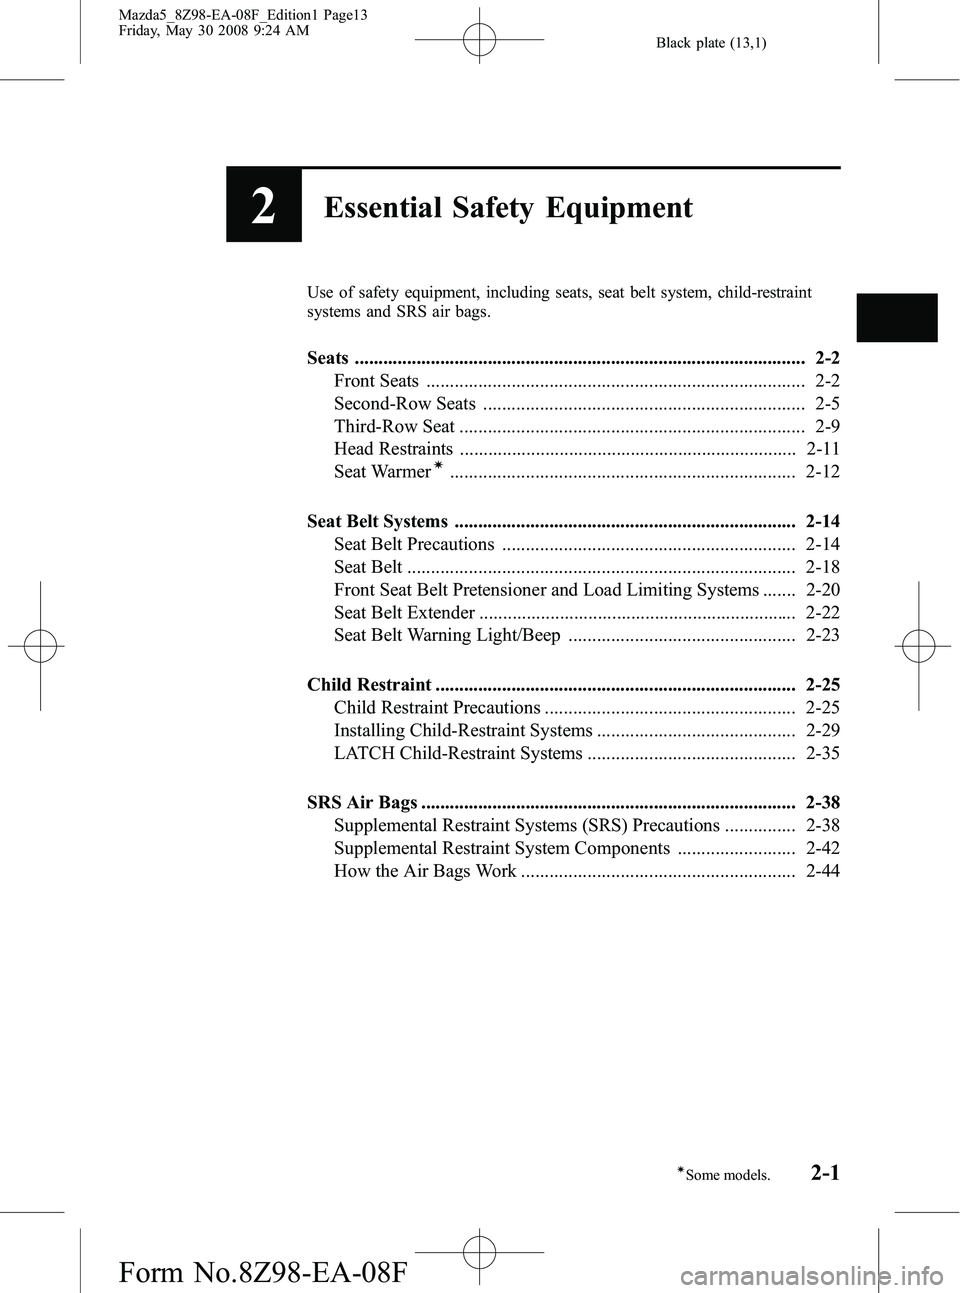 MAZDA MODEL 5 2009 User Guide Black plate (13,1)
2Essential Safety Equipment
Use of safety equipment, including seats, seat belt system, child-restraint
systems and SRS air bags.
Seats .............................................